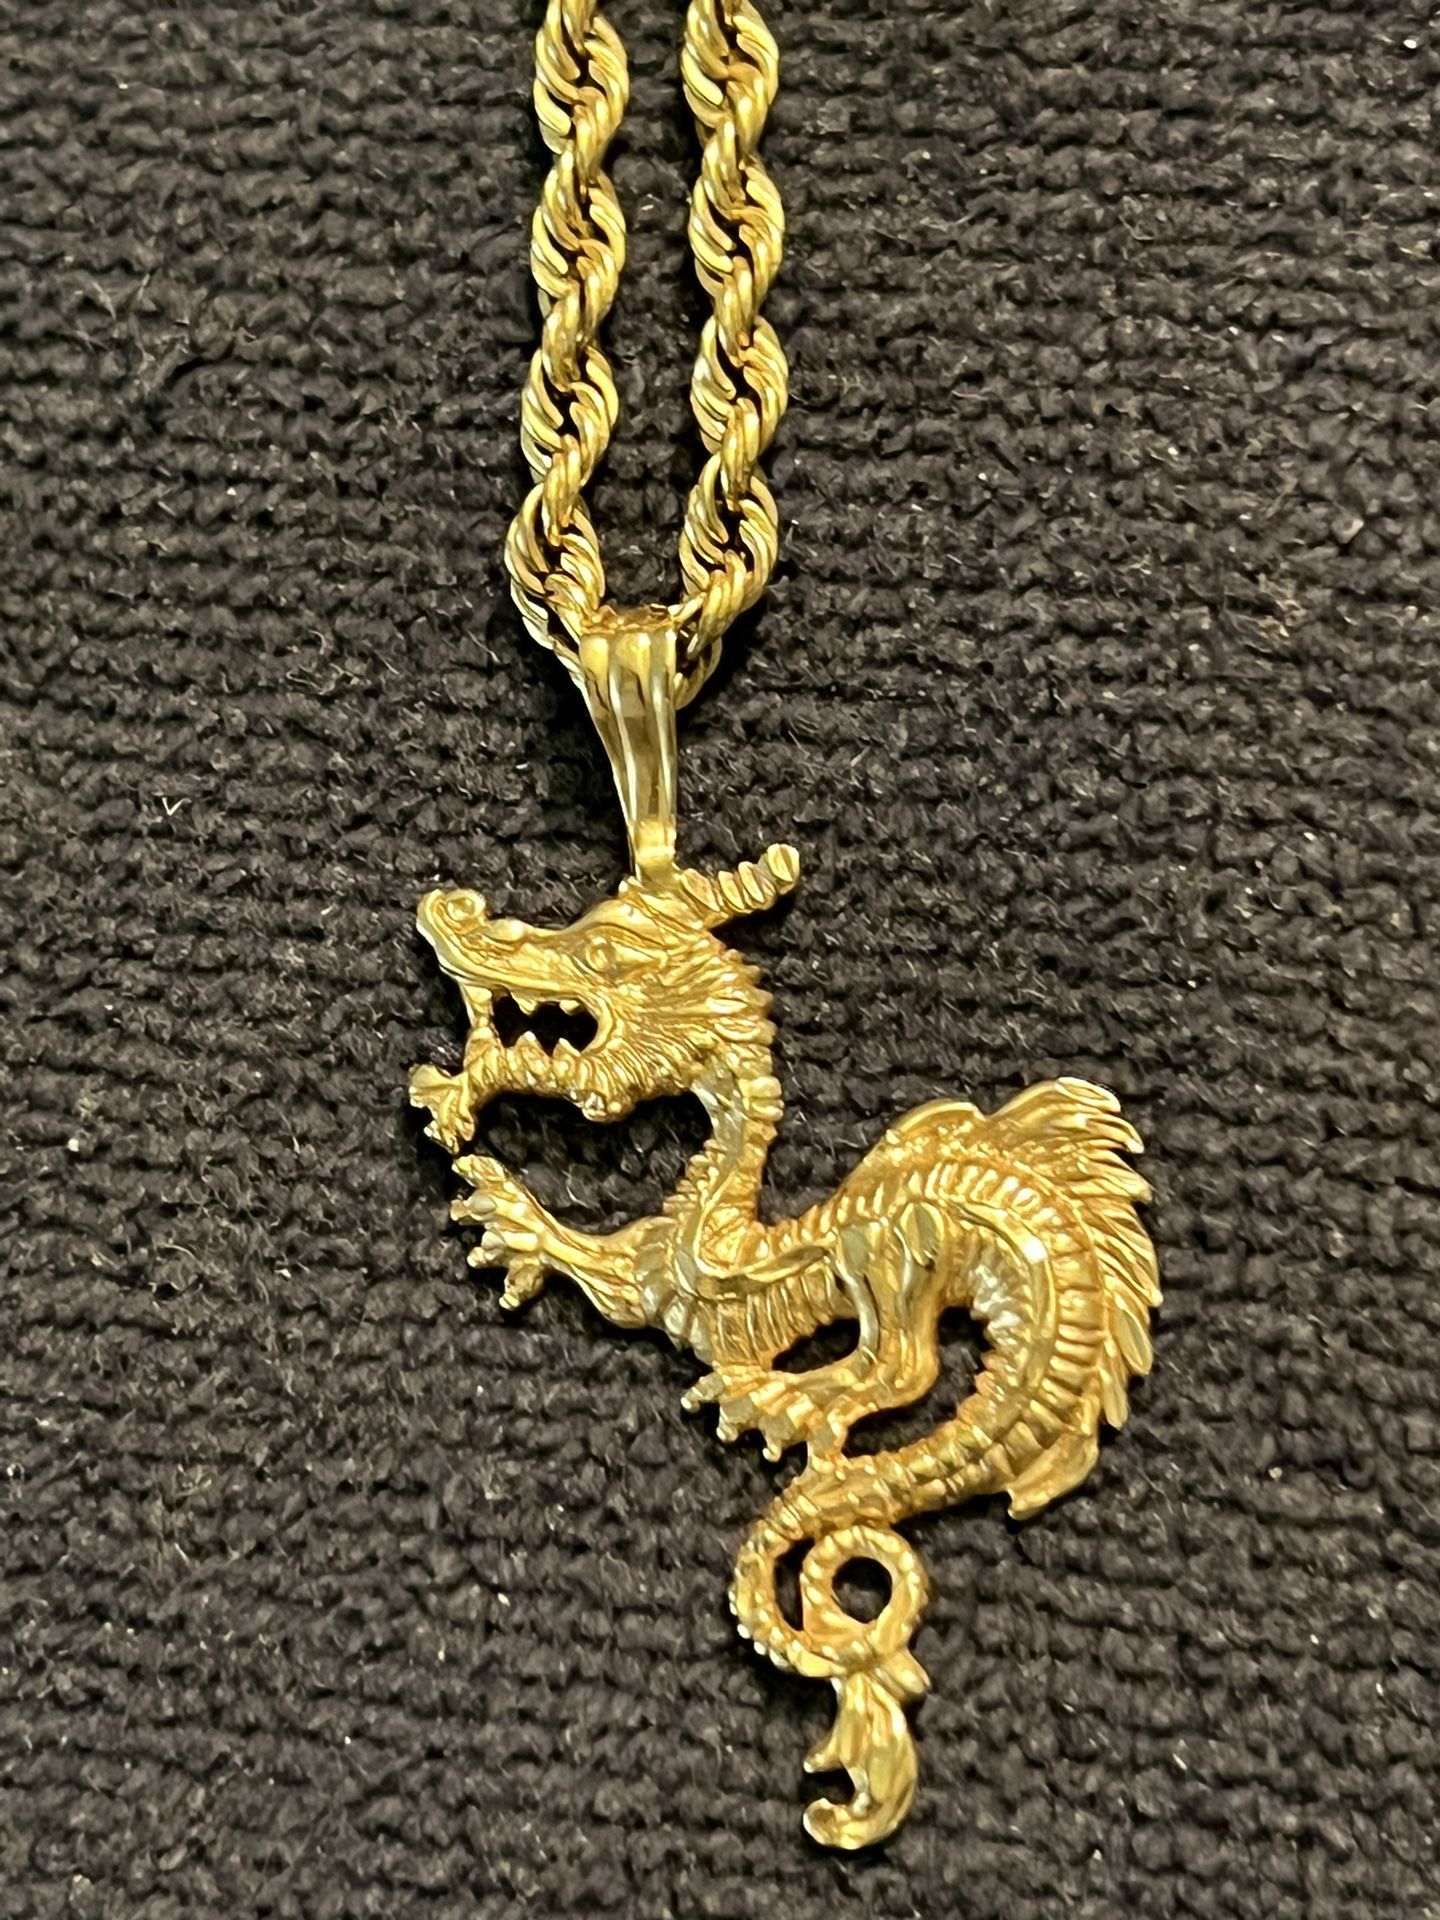 Solid Gold, Chain And Dragon Pendant With Bulova Watch!